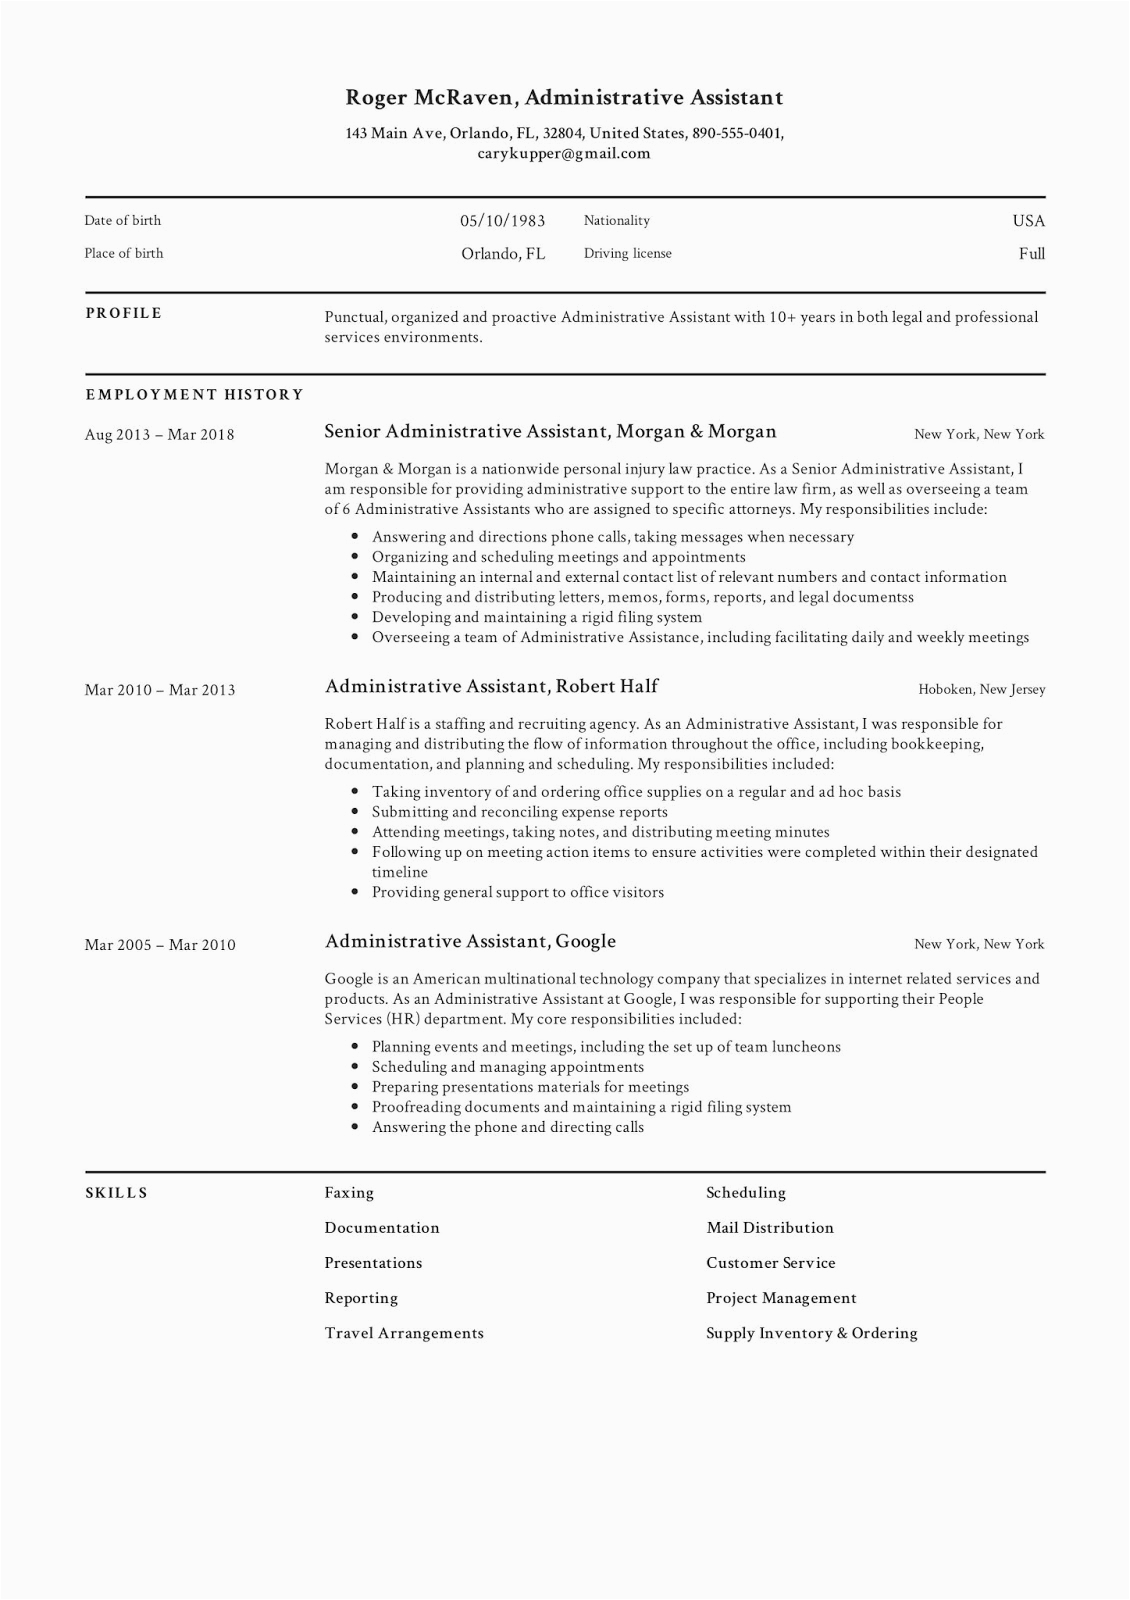 Sample Resumes for Administrative assistant Positions Executive assistant Resume Samples 2020